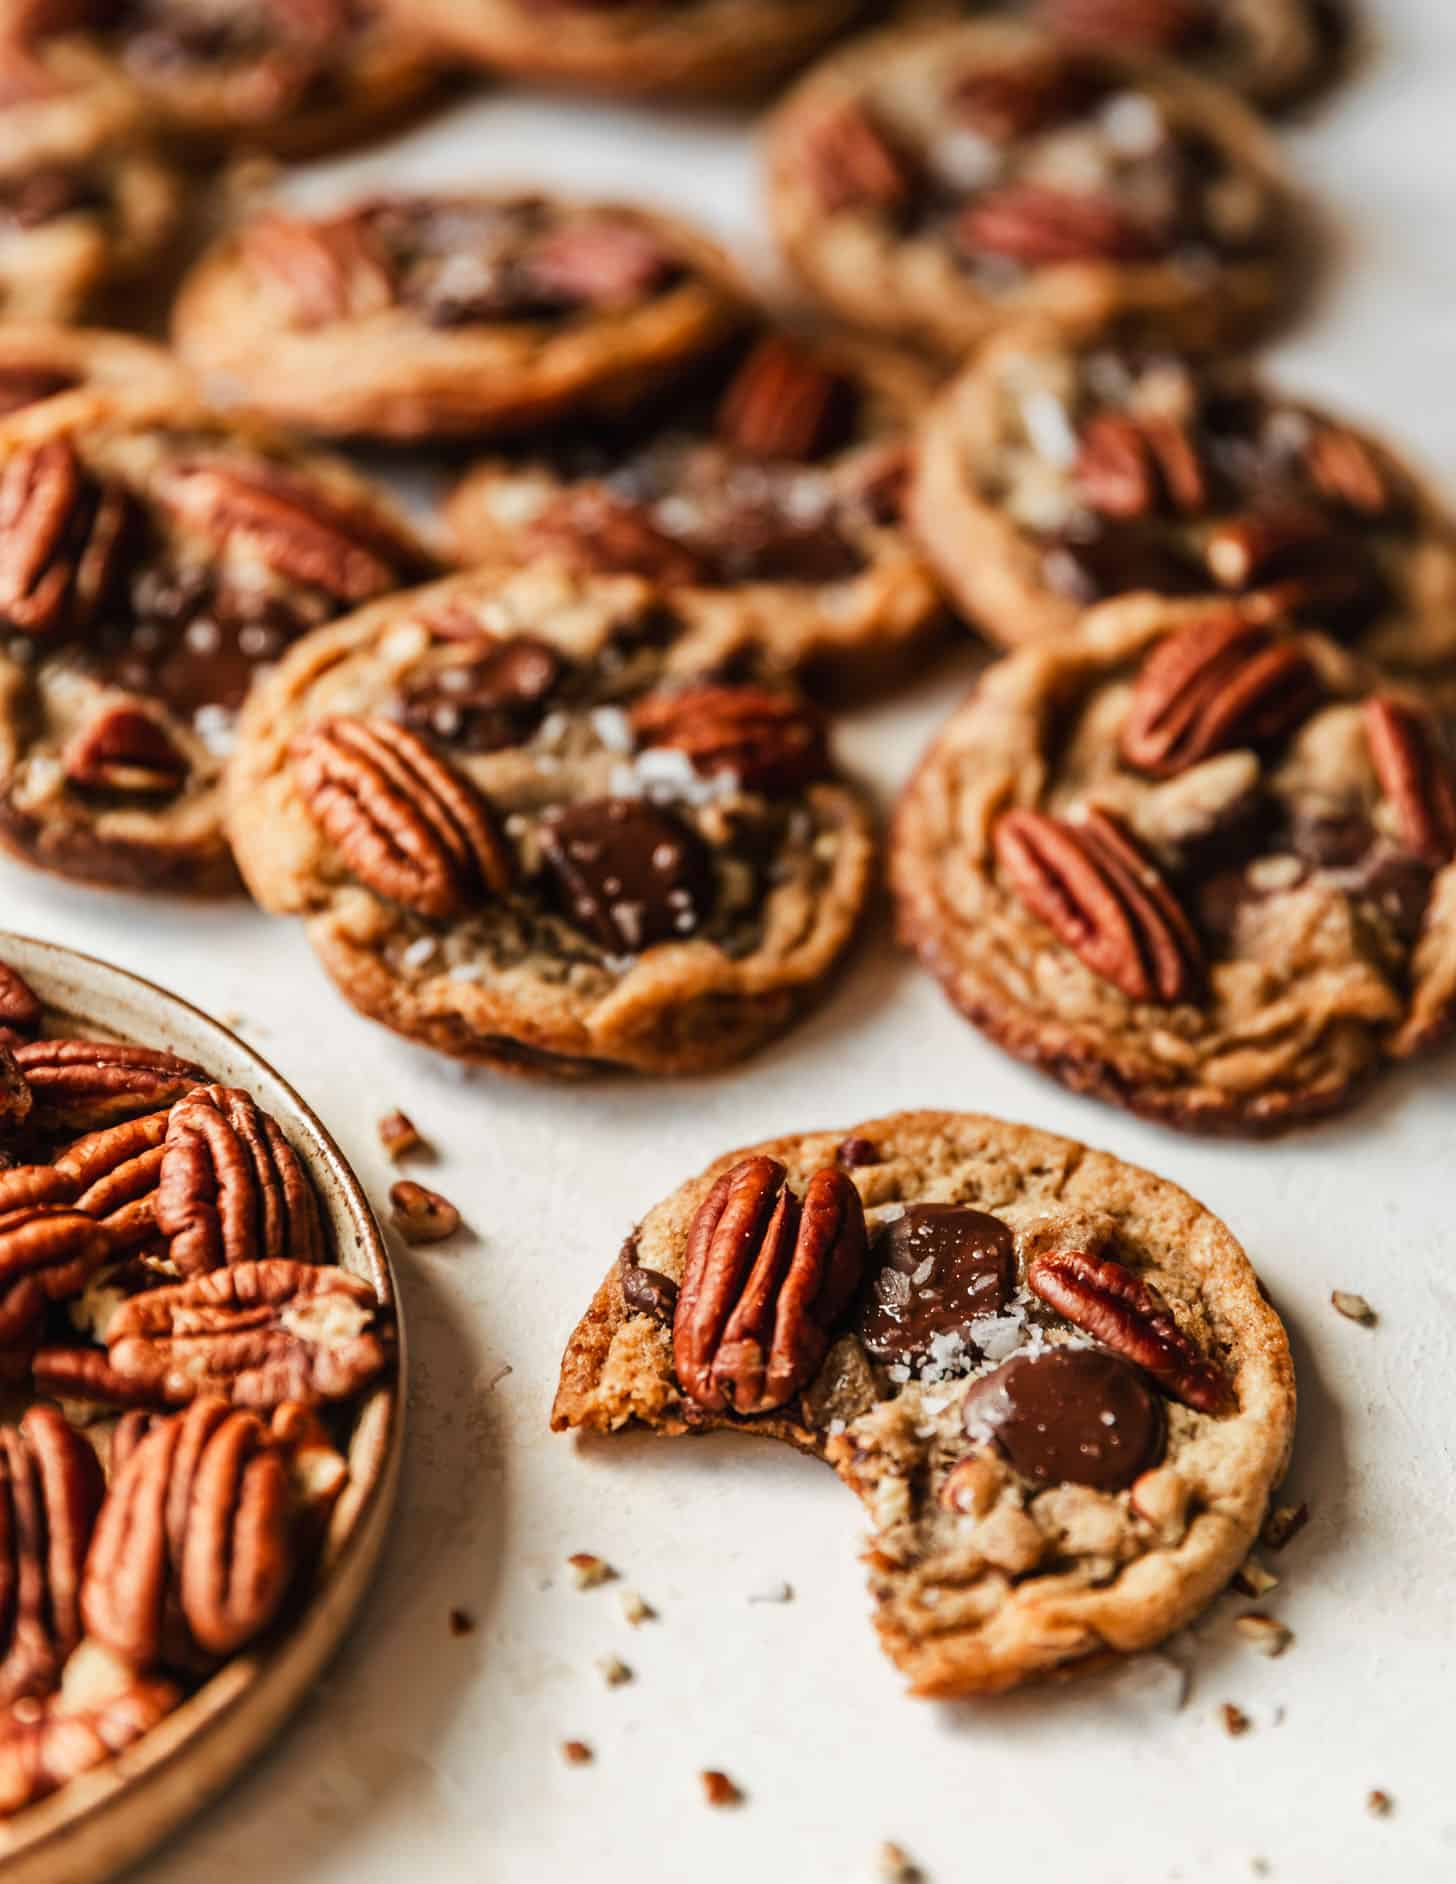 A pecan chocolate chip cookie with a bite taken out of it on a beige counter next to a brown plate of pecans and piles of cookies.